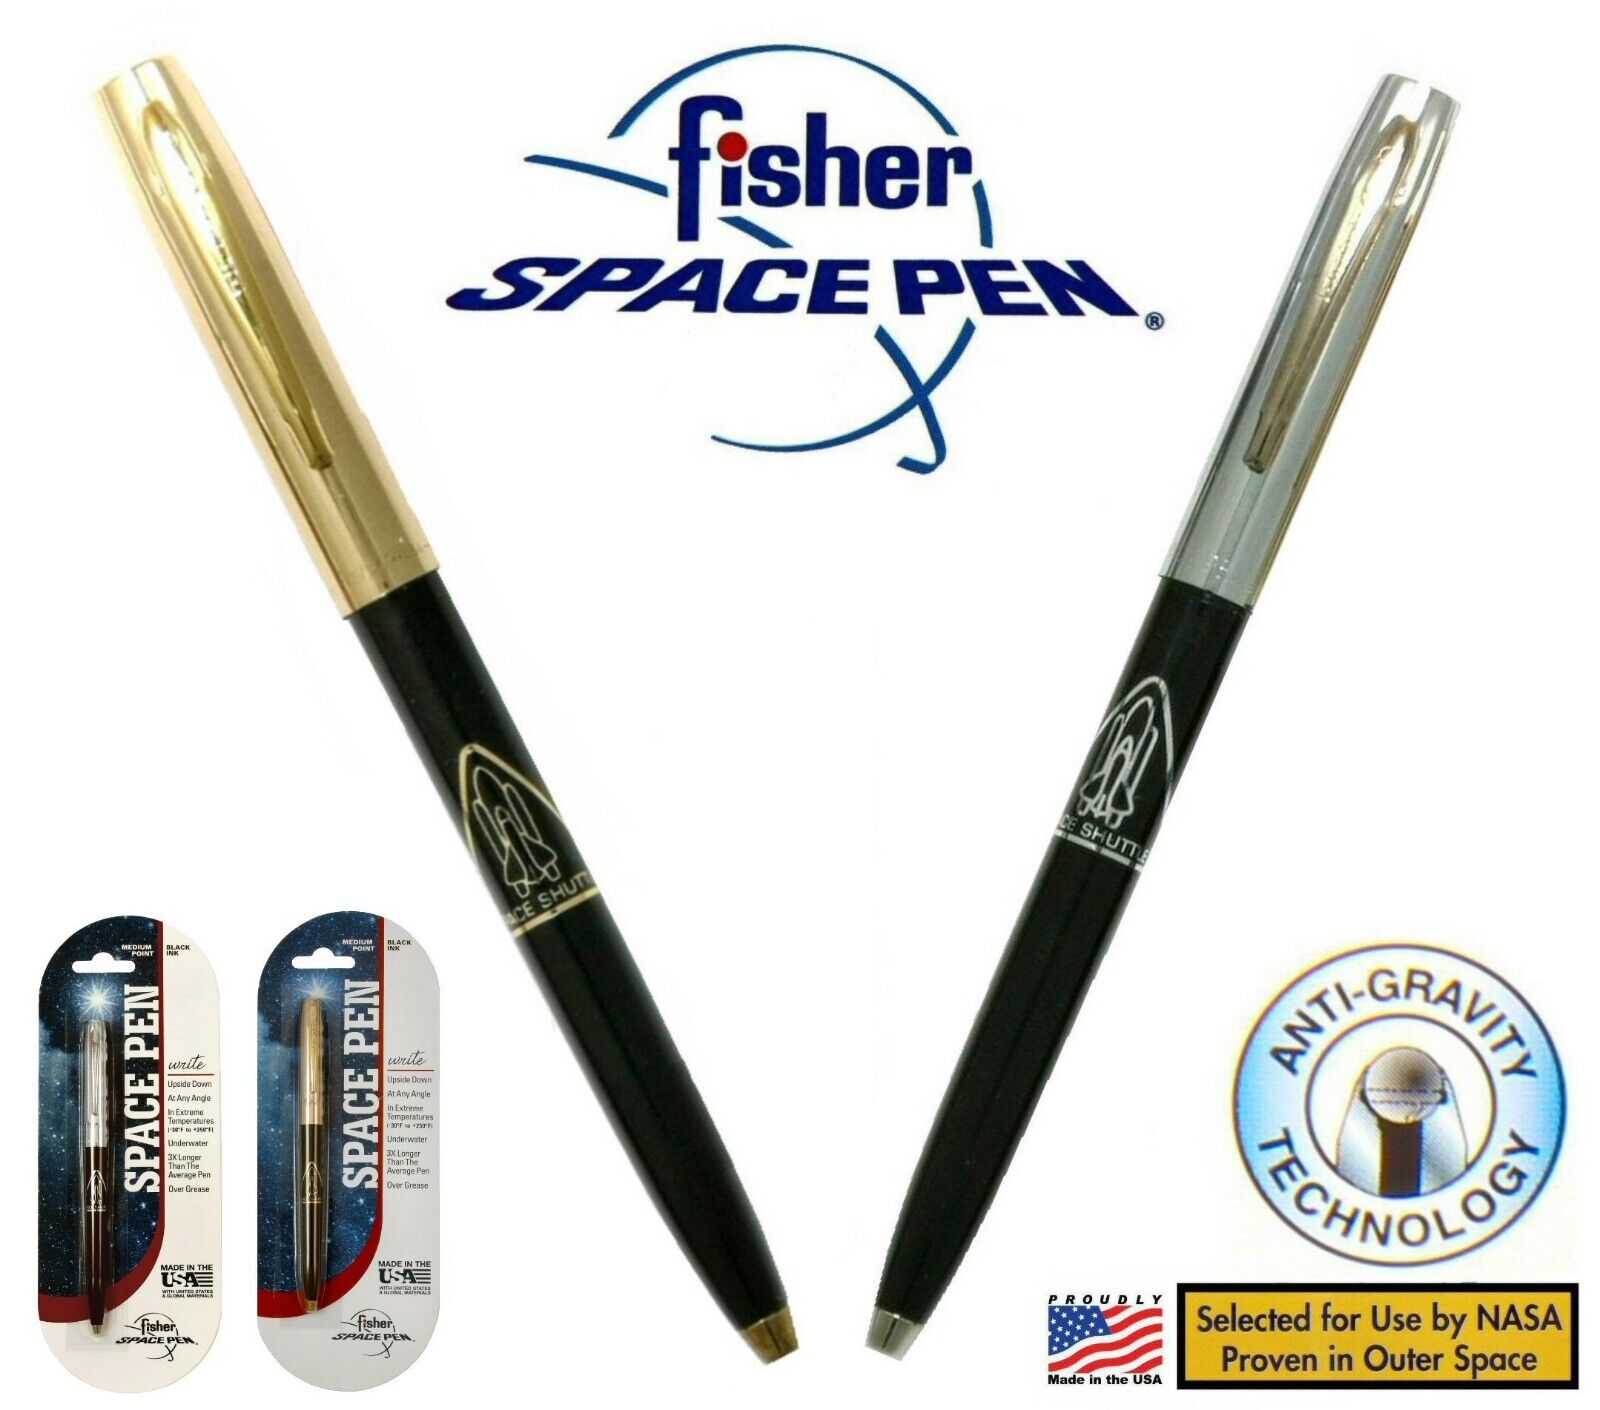 2 Fisher Space Pens / Black Pen Body with Shuttle /  #S294-Chrome & S294G-Gold 